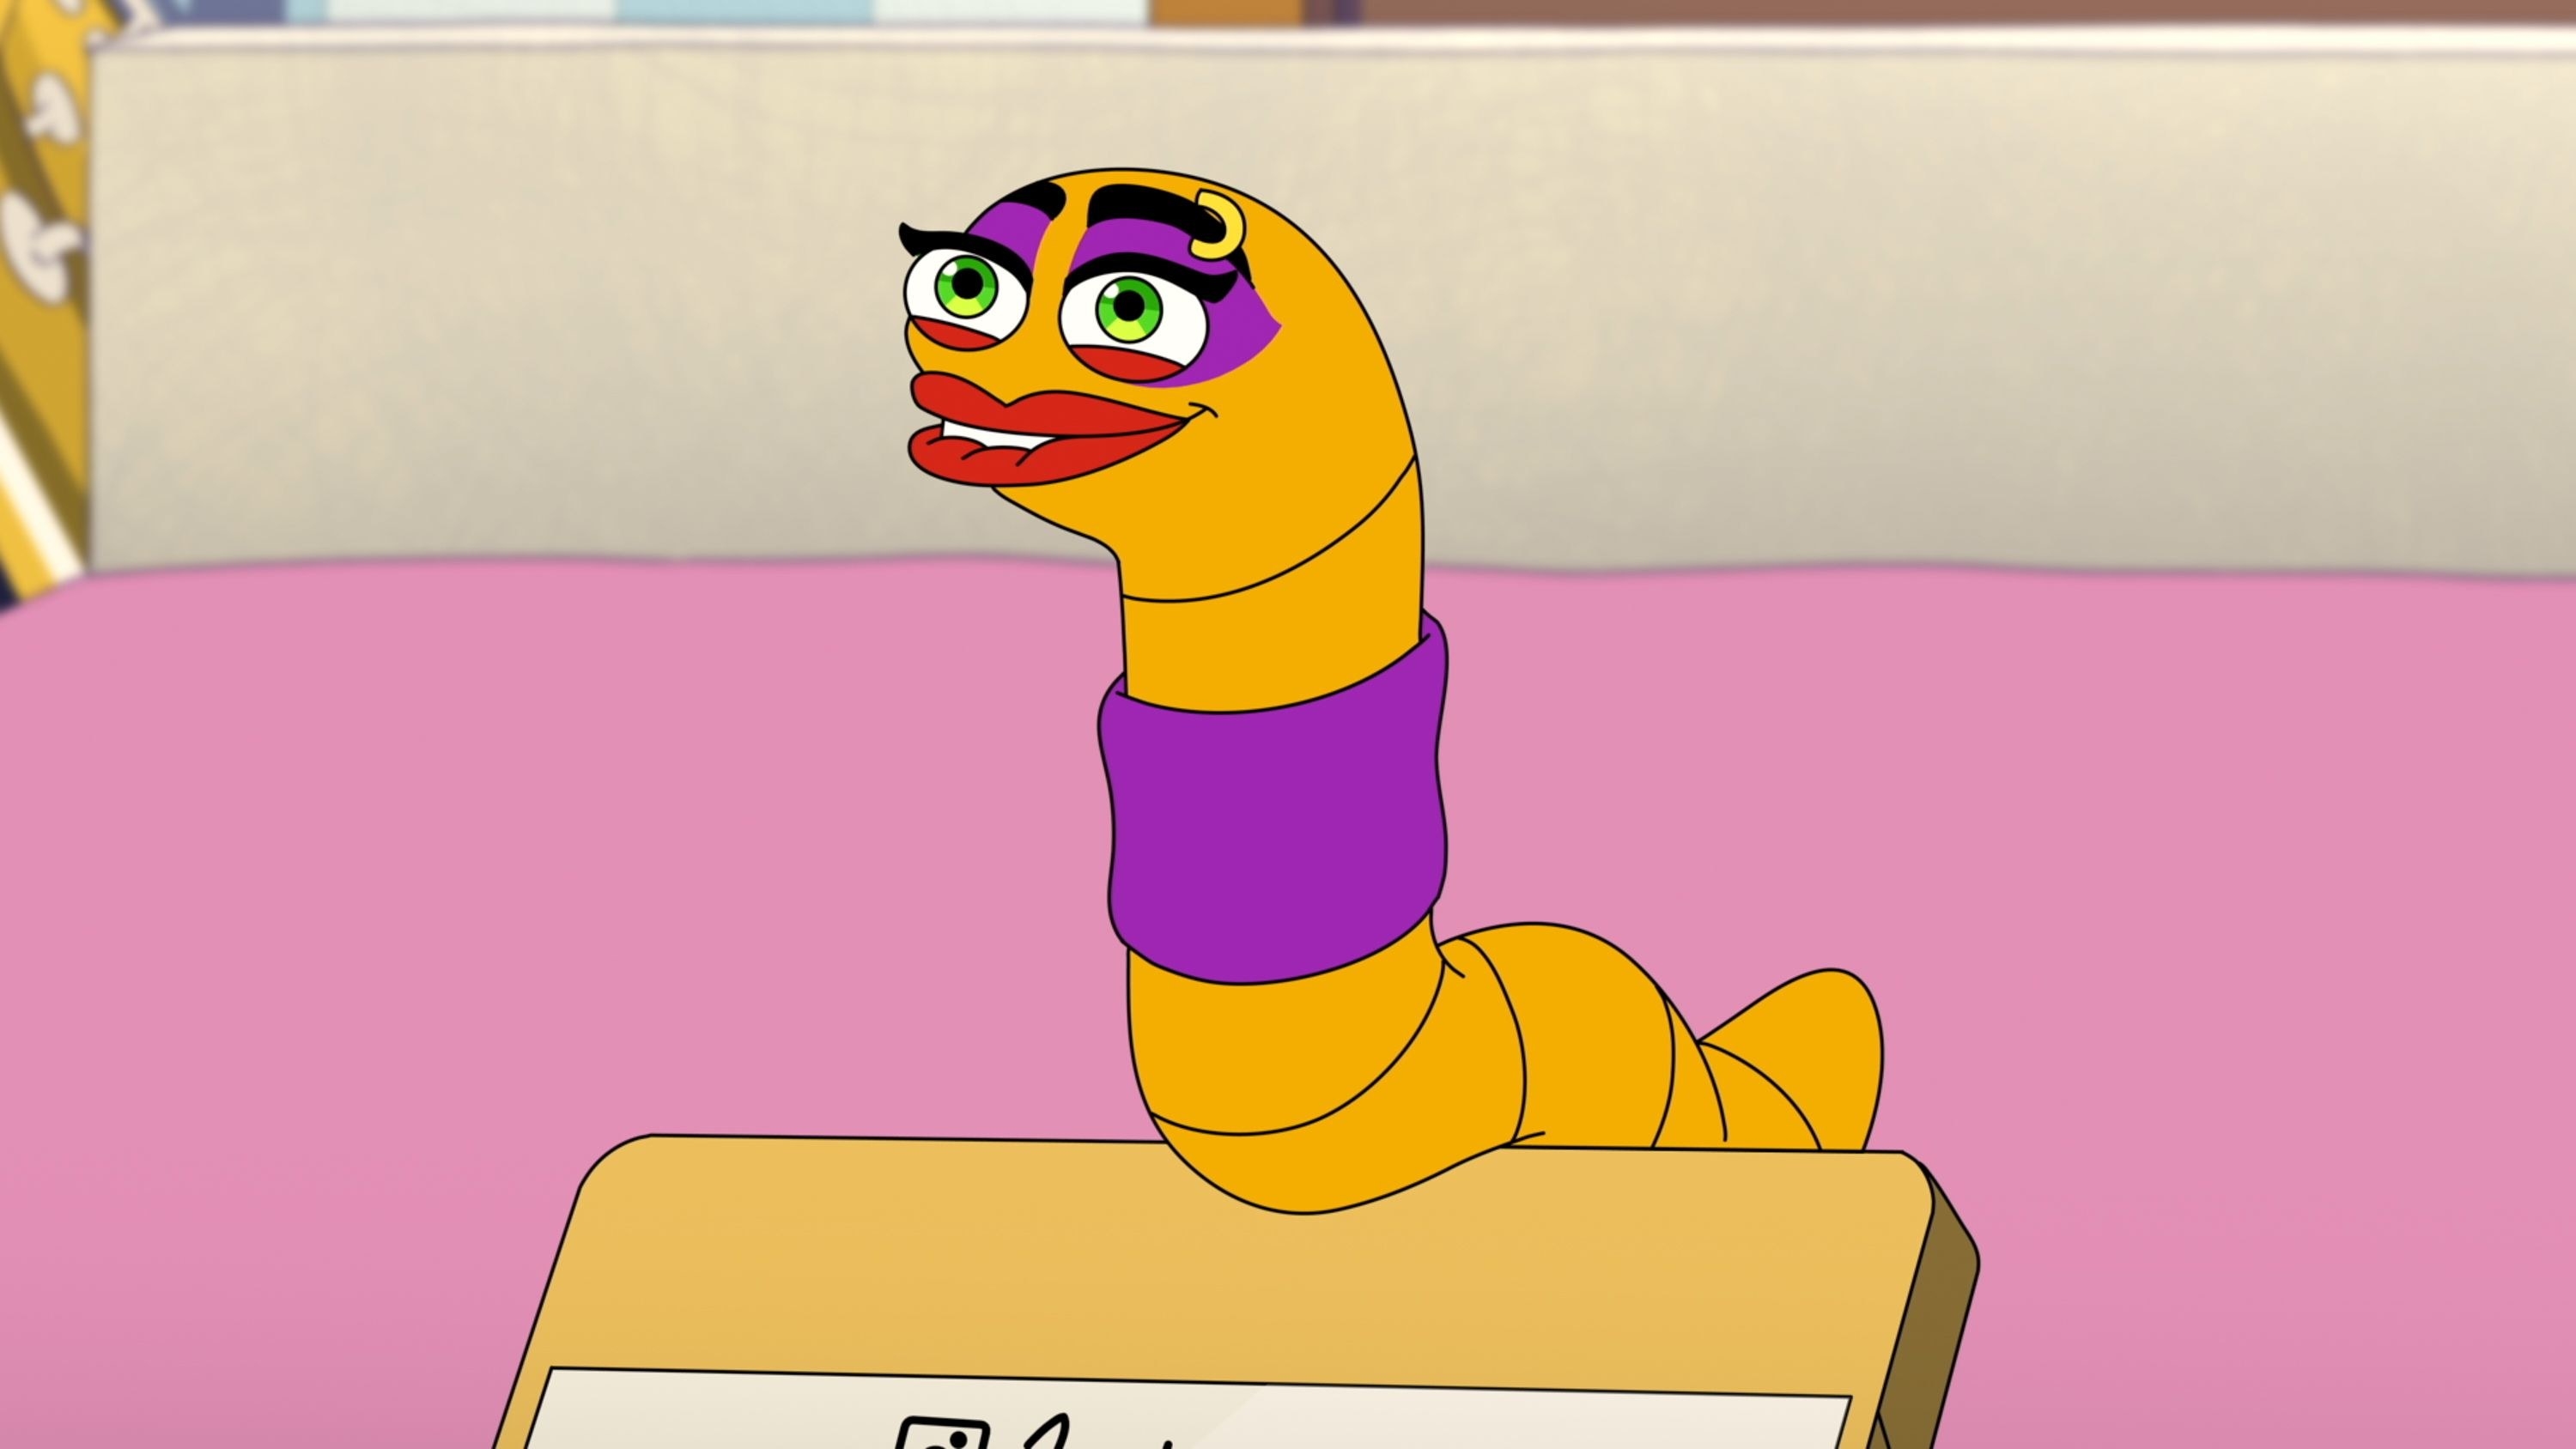 An animated worm wearing makeup and smiling